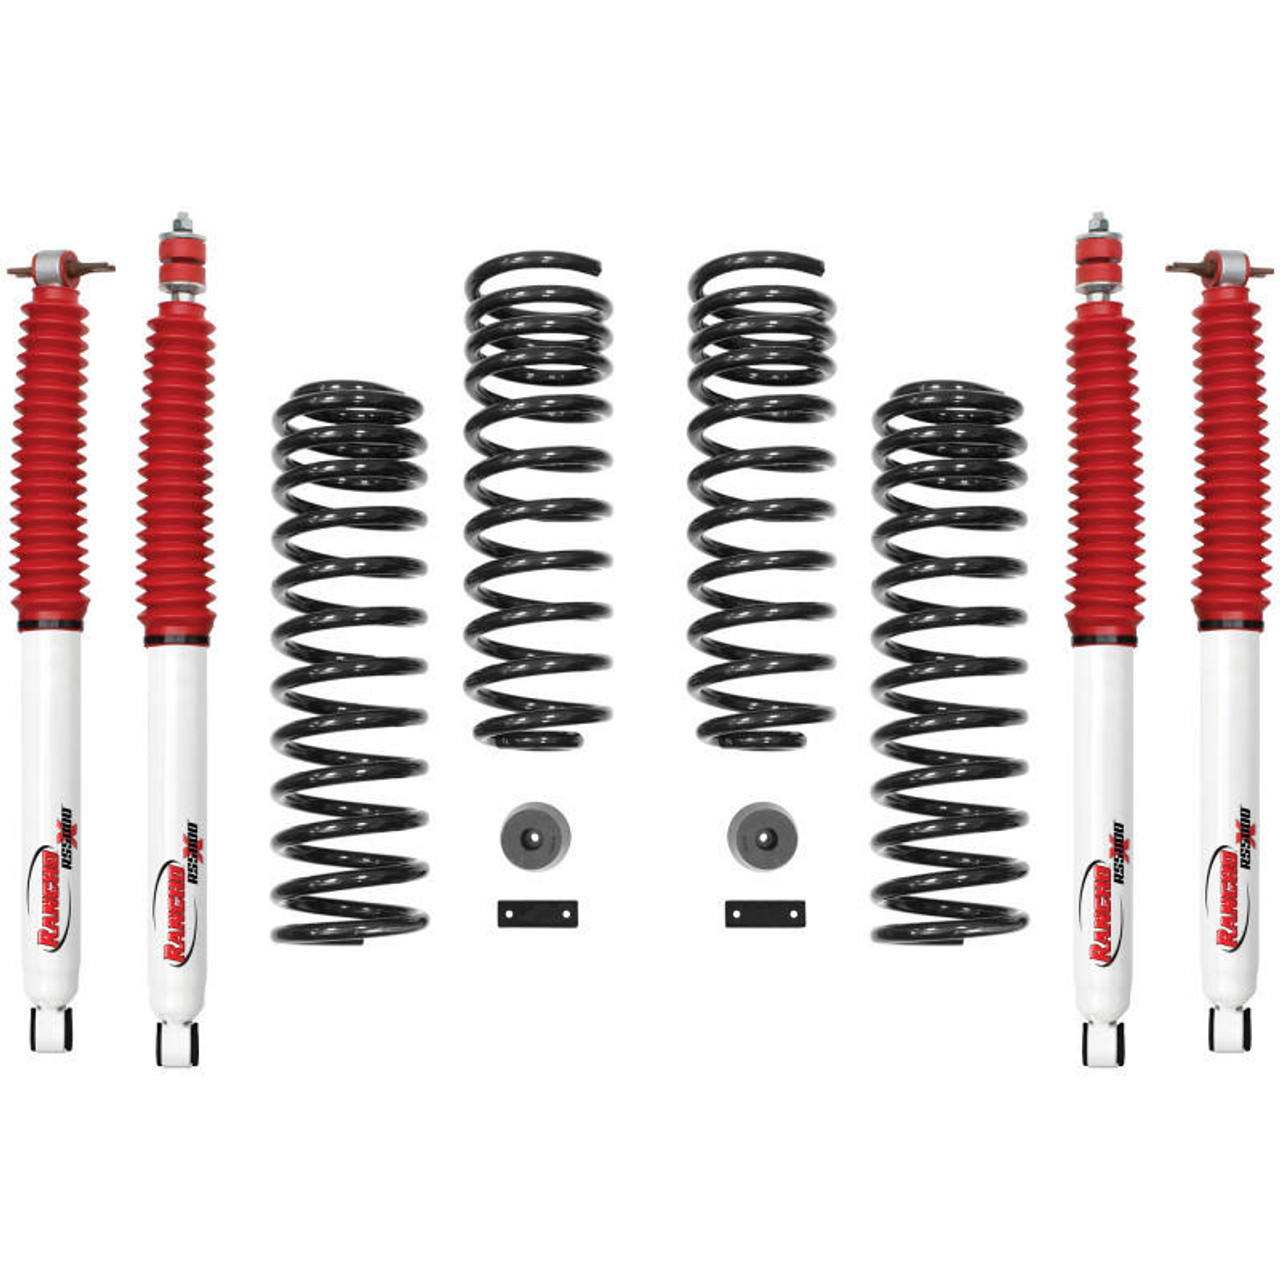 Rancho 07-17 Jeep Wrangler Front and Rear Suspension System - Master Part Number / One Box - RS66118BR5